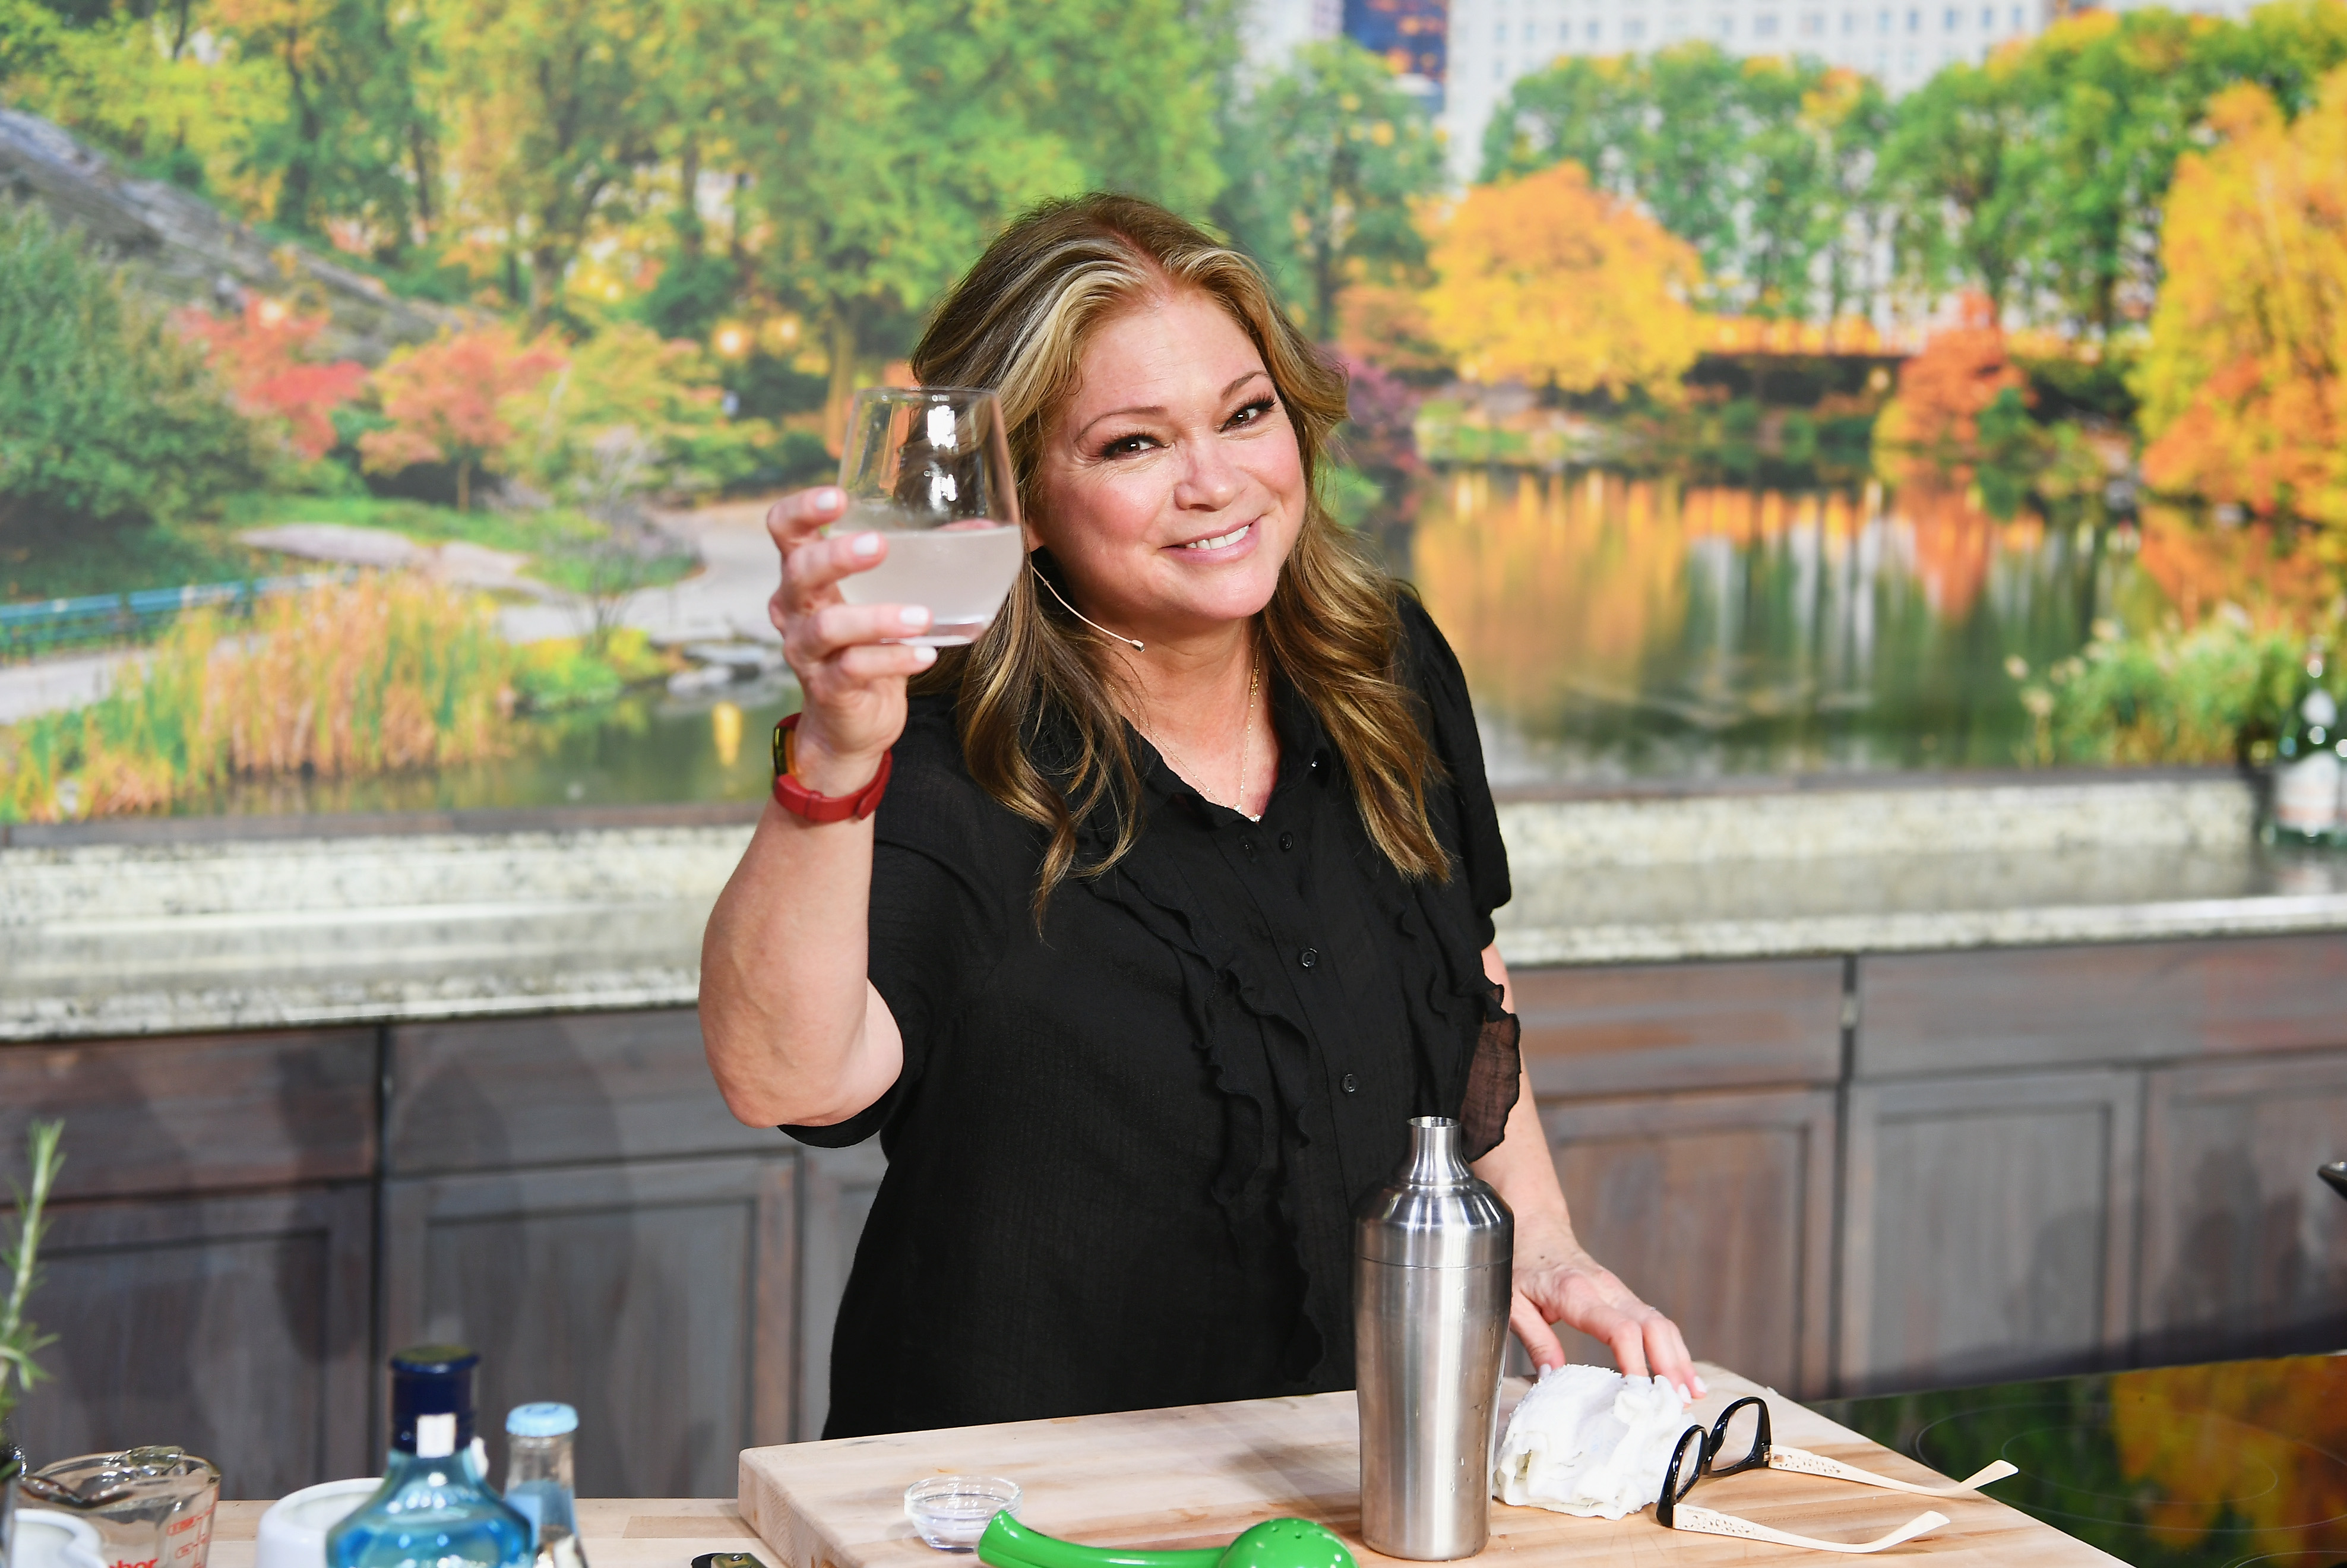 Food Network star Valerie Bertinelli wears a short-sleeve black top and raises a glass